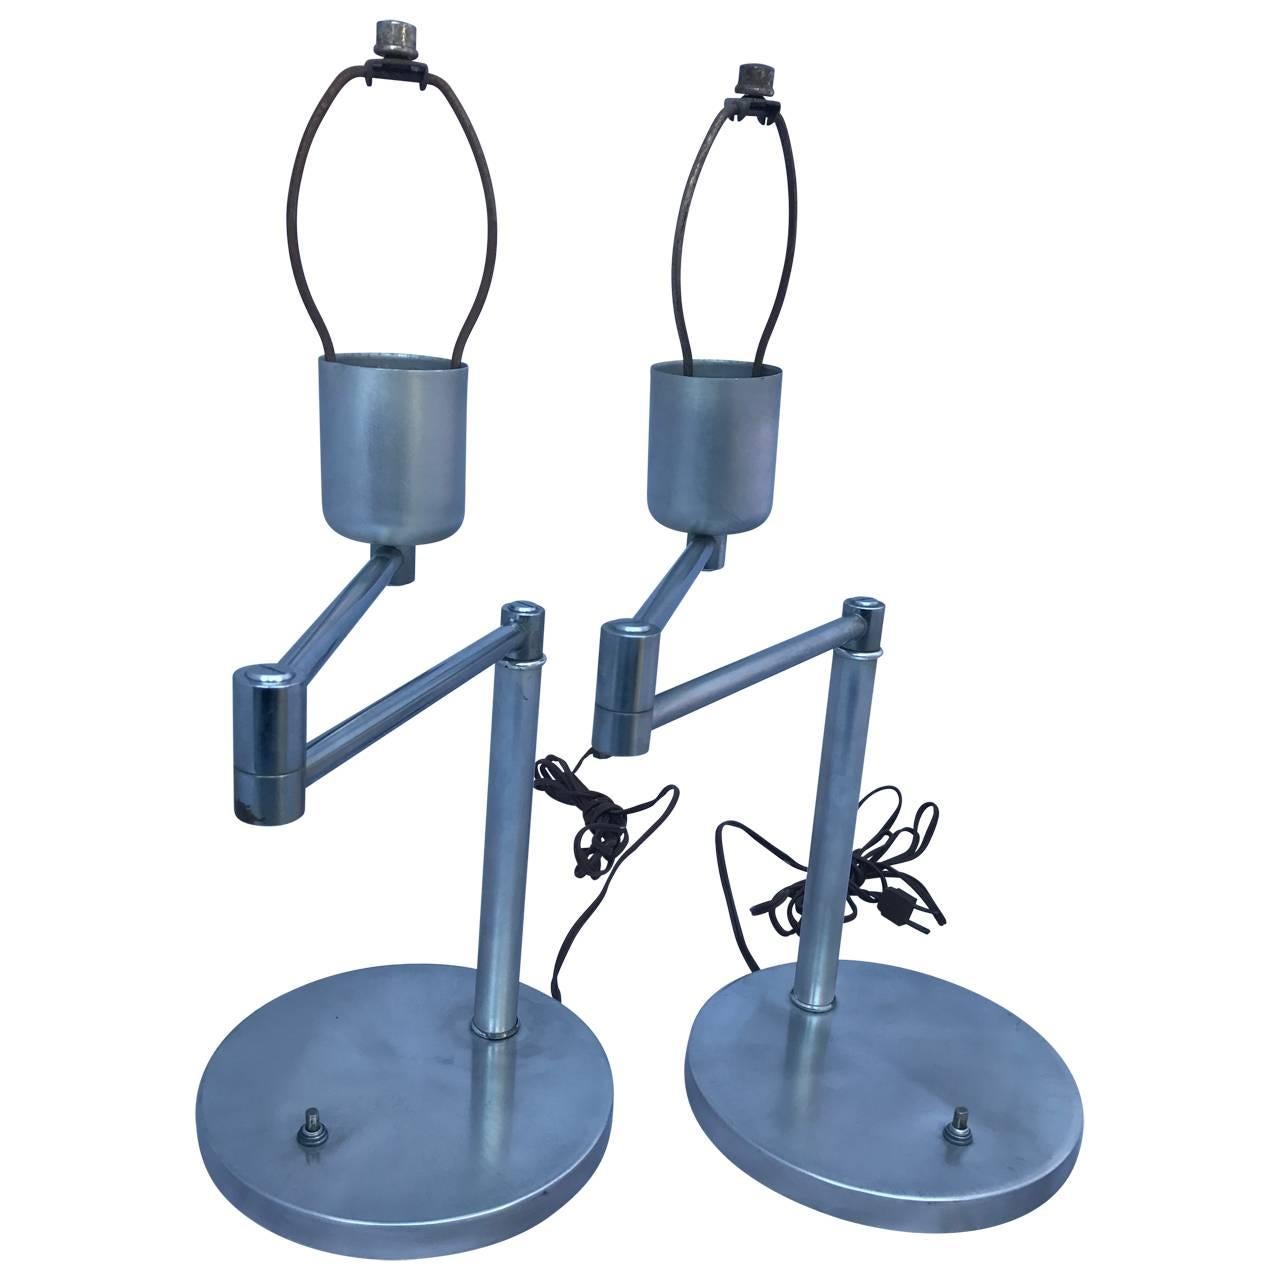 Early Pair of Von Nessen Swing Arm Table Lamps